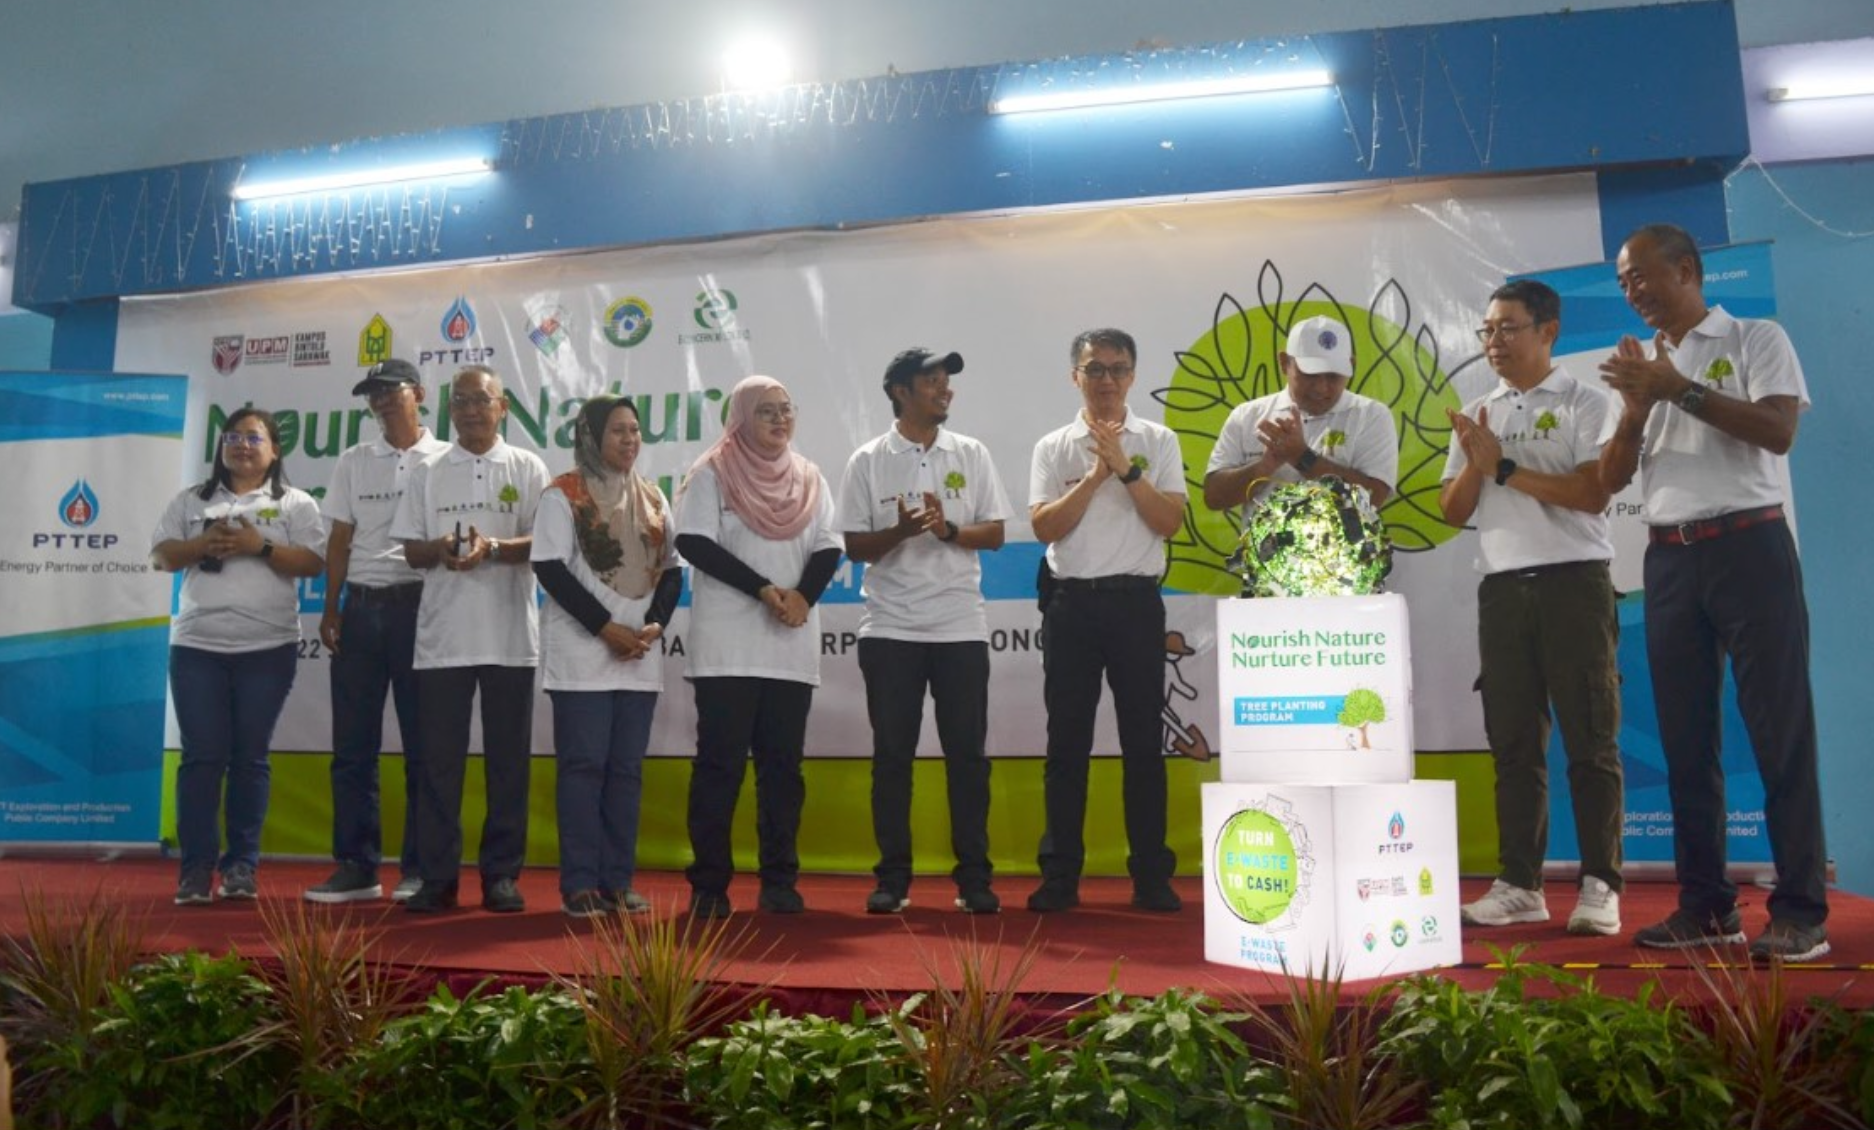 Through three sustainability initiatives, PTTEP Malaysia aims to address important environmental issues within the local landscape. - File pic credit (PTTEP Malaysia)